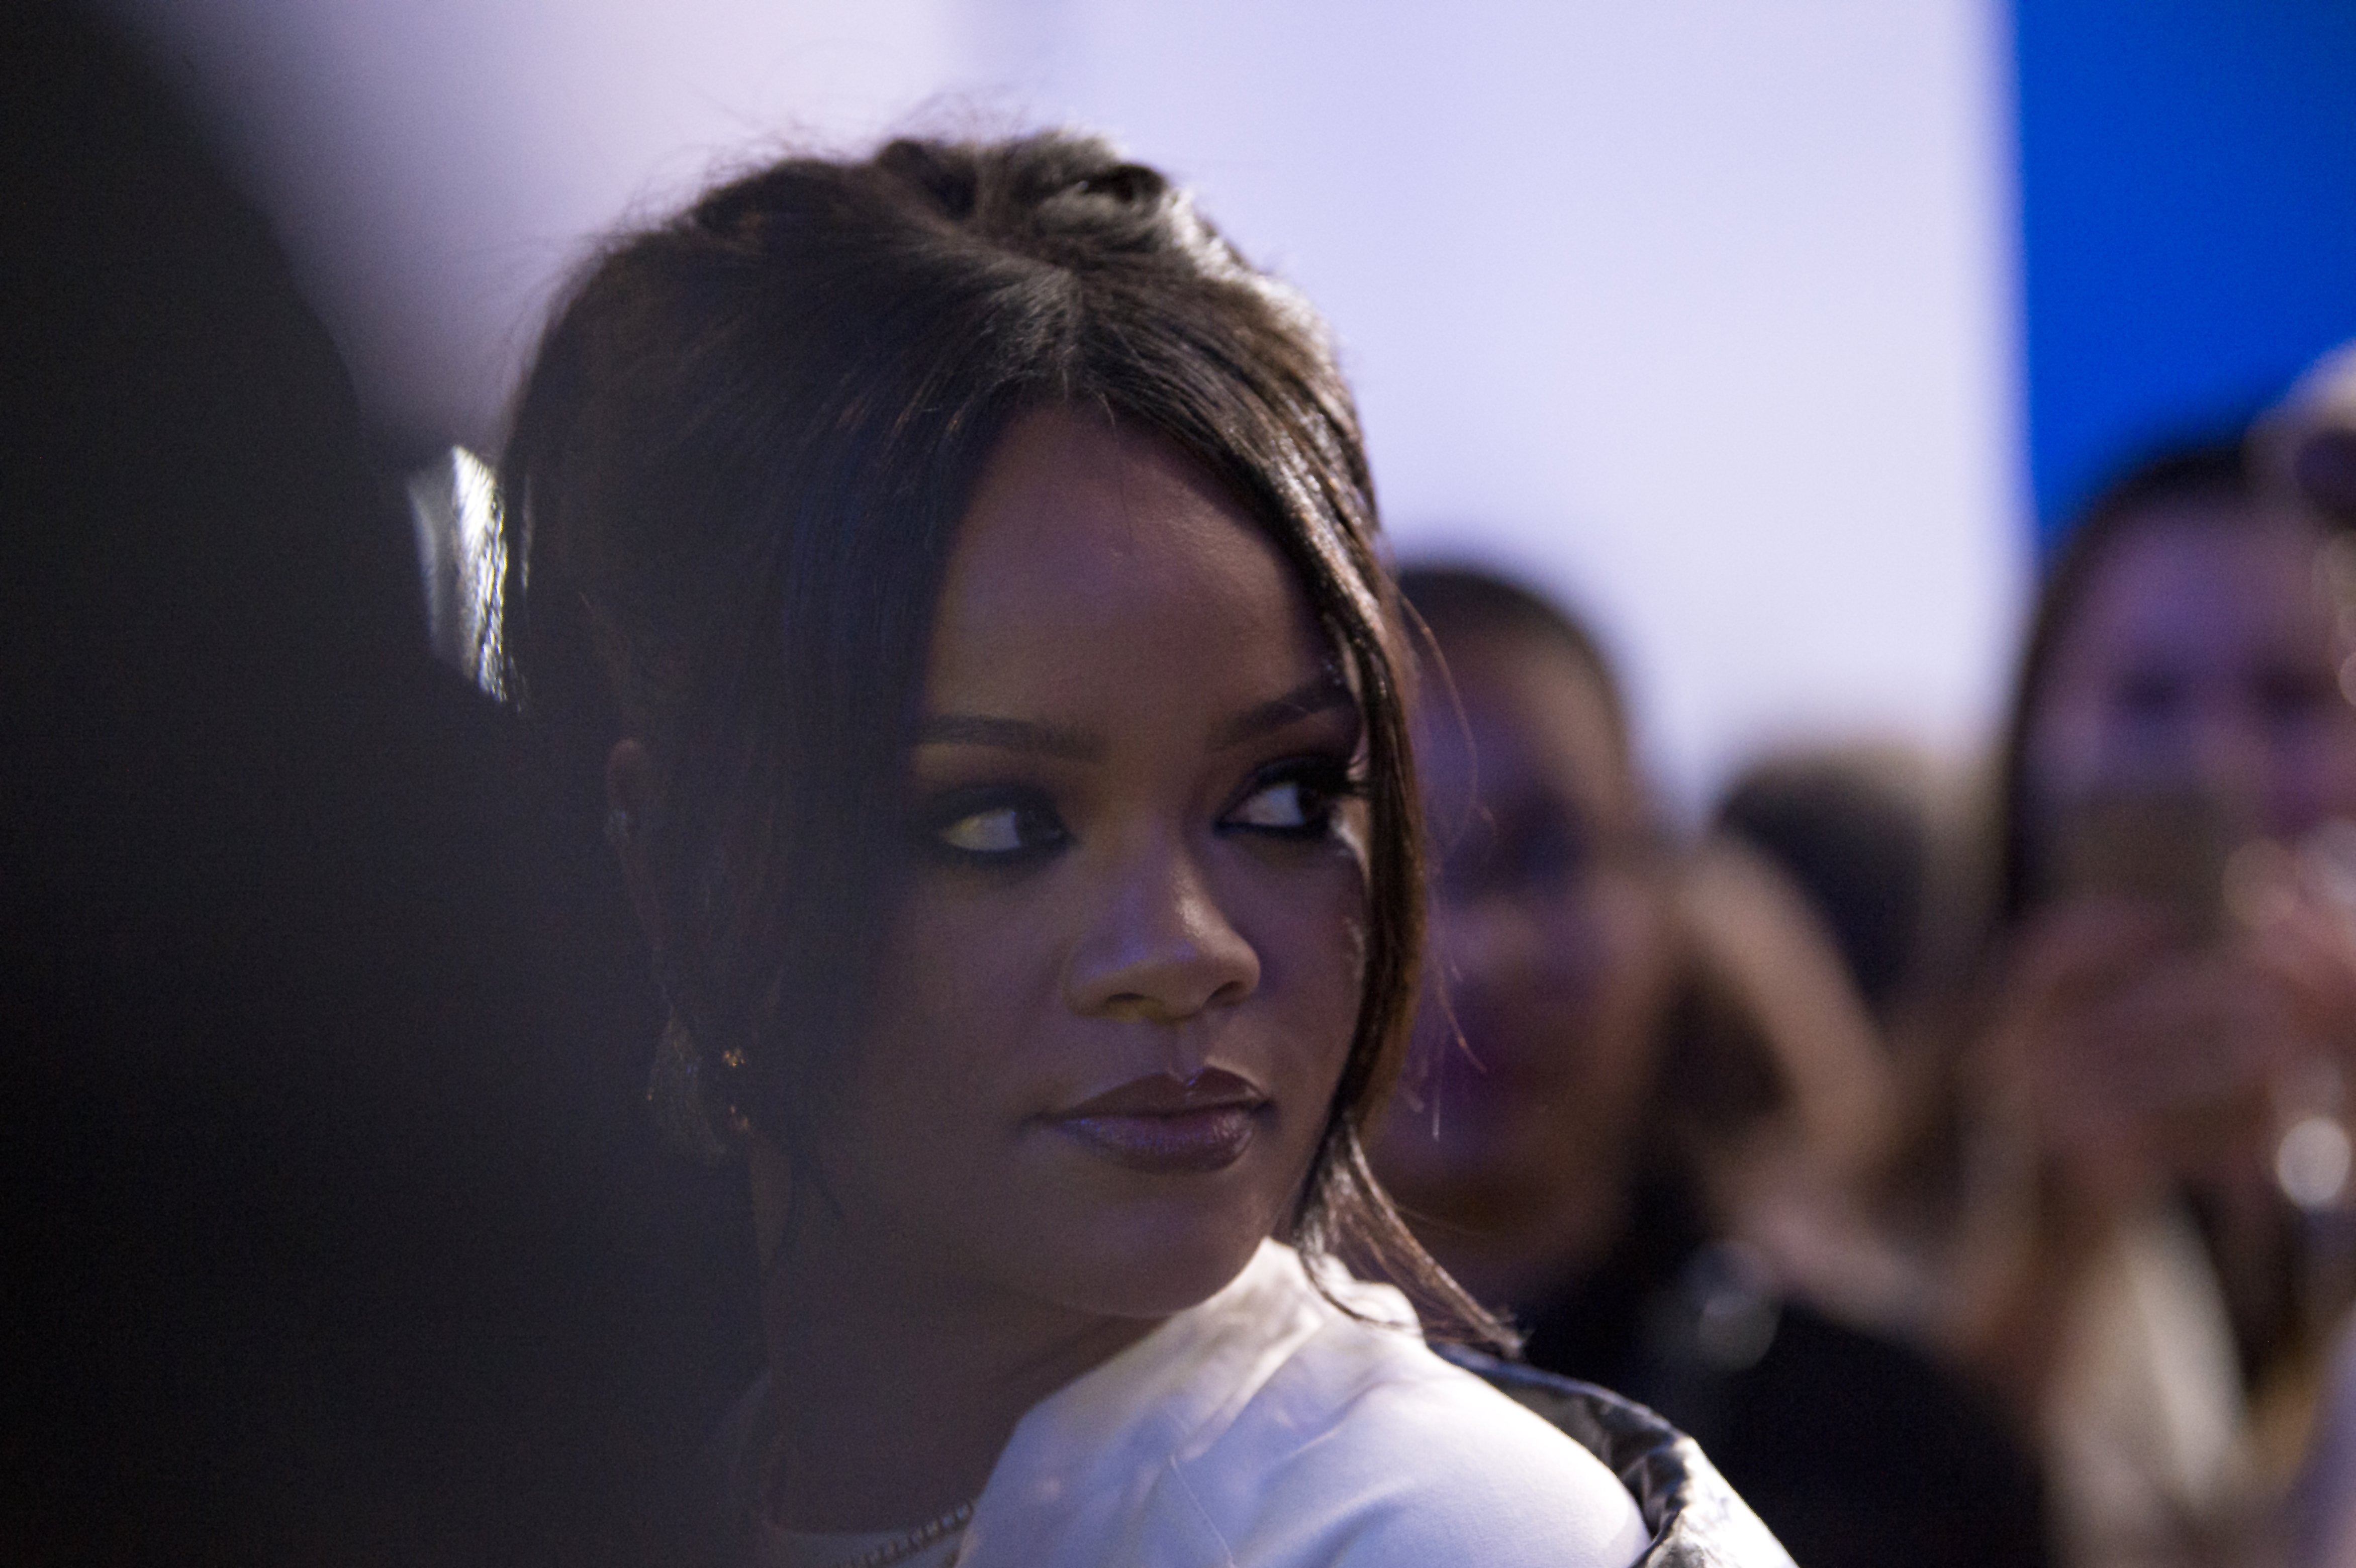 Rihanna attends the Fenty Exclusive Preview on May 23, 2019 in Paris, France. | Photo: GettyImages